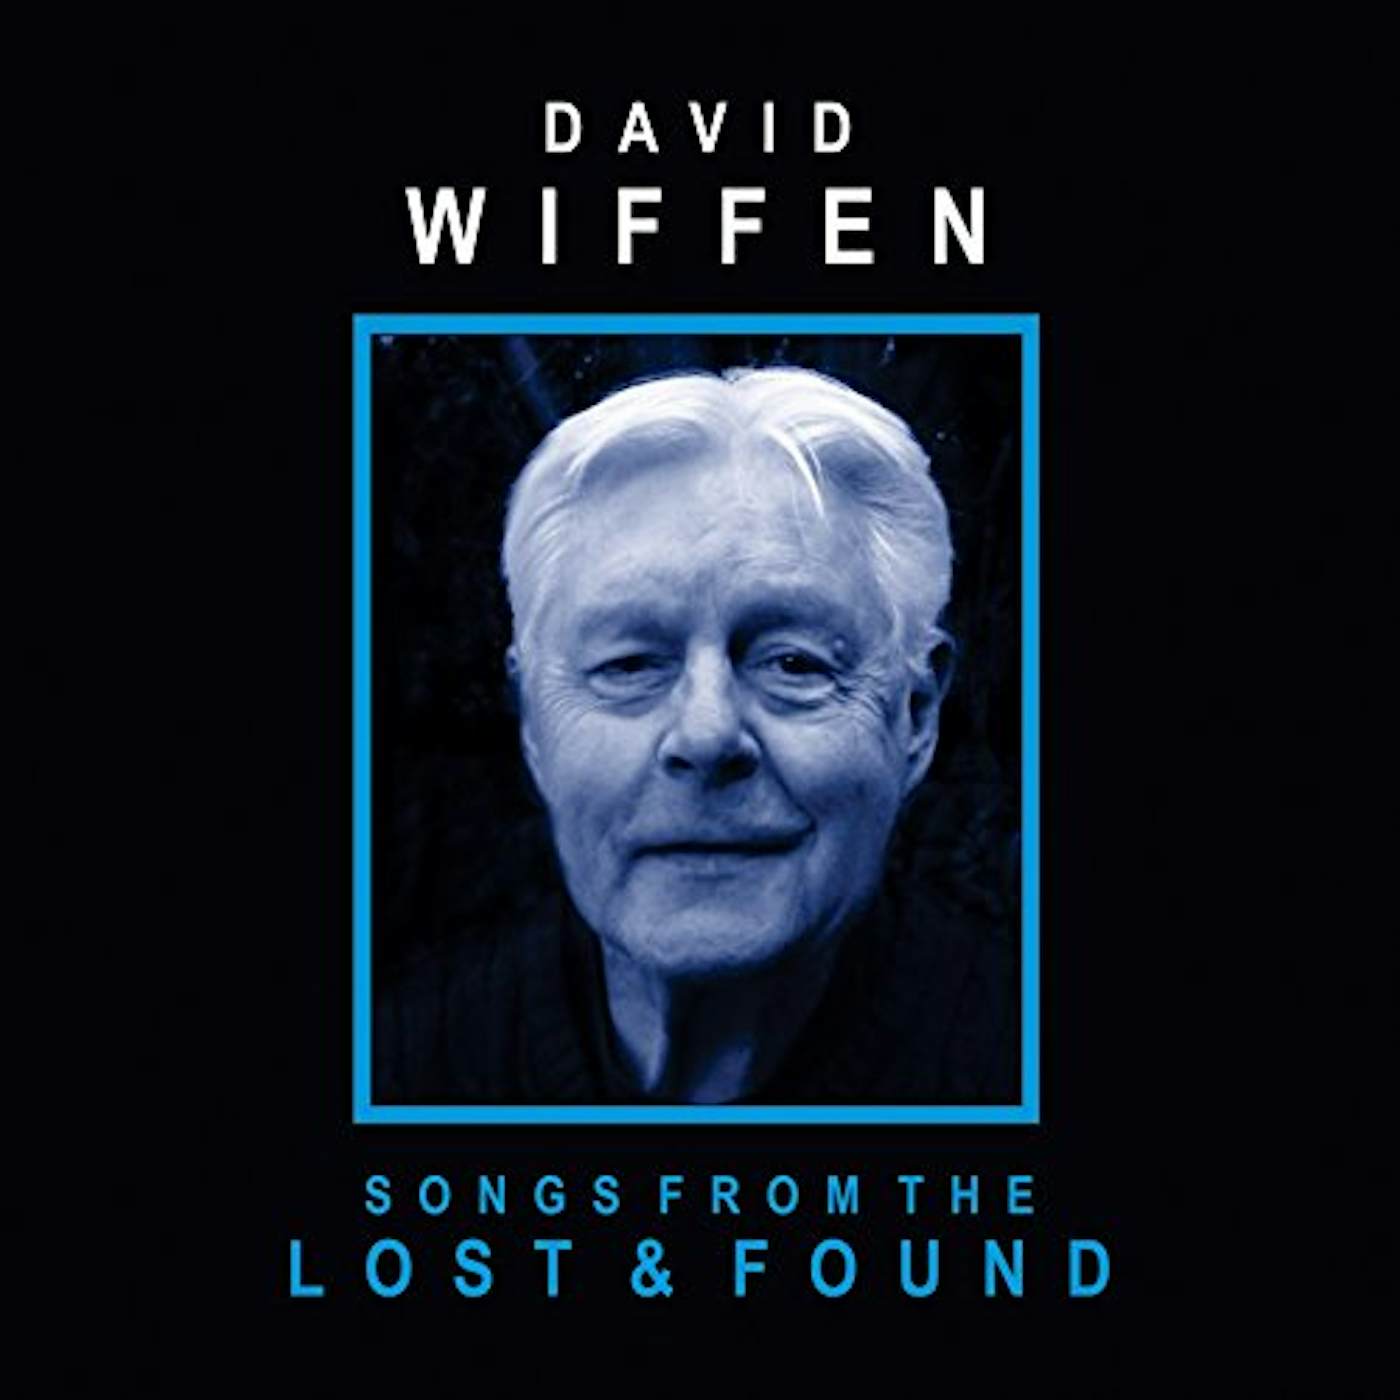 David Wiffen SONGS FROM THE LOST & FOUND CD